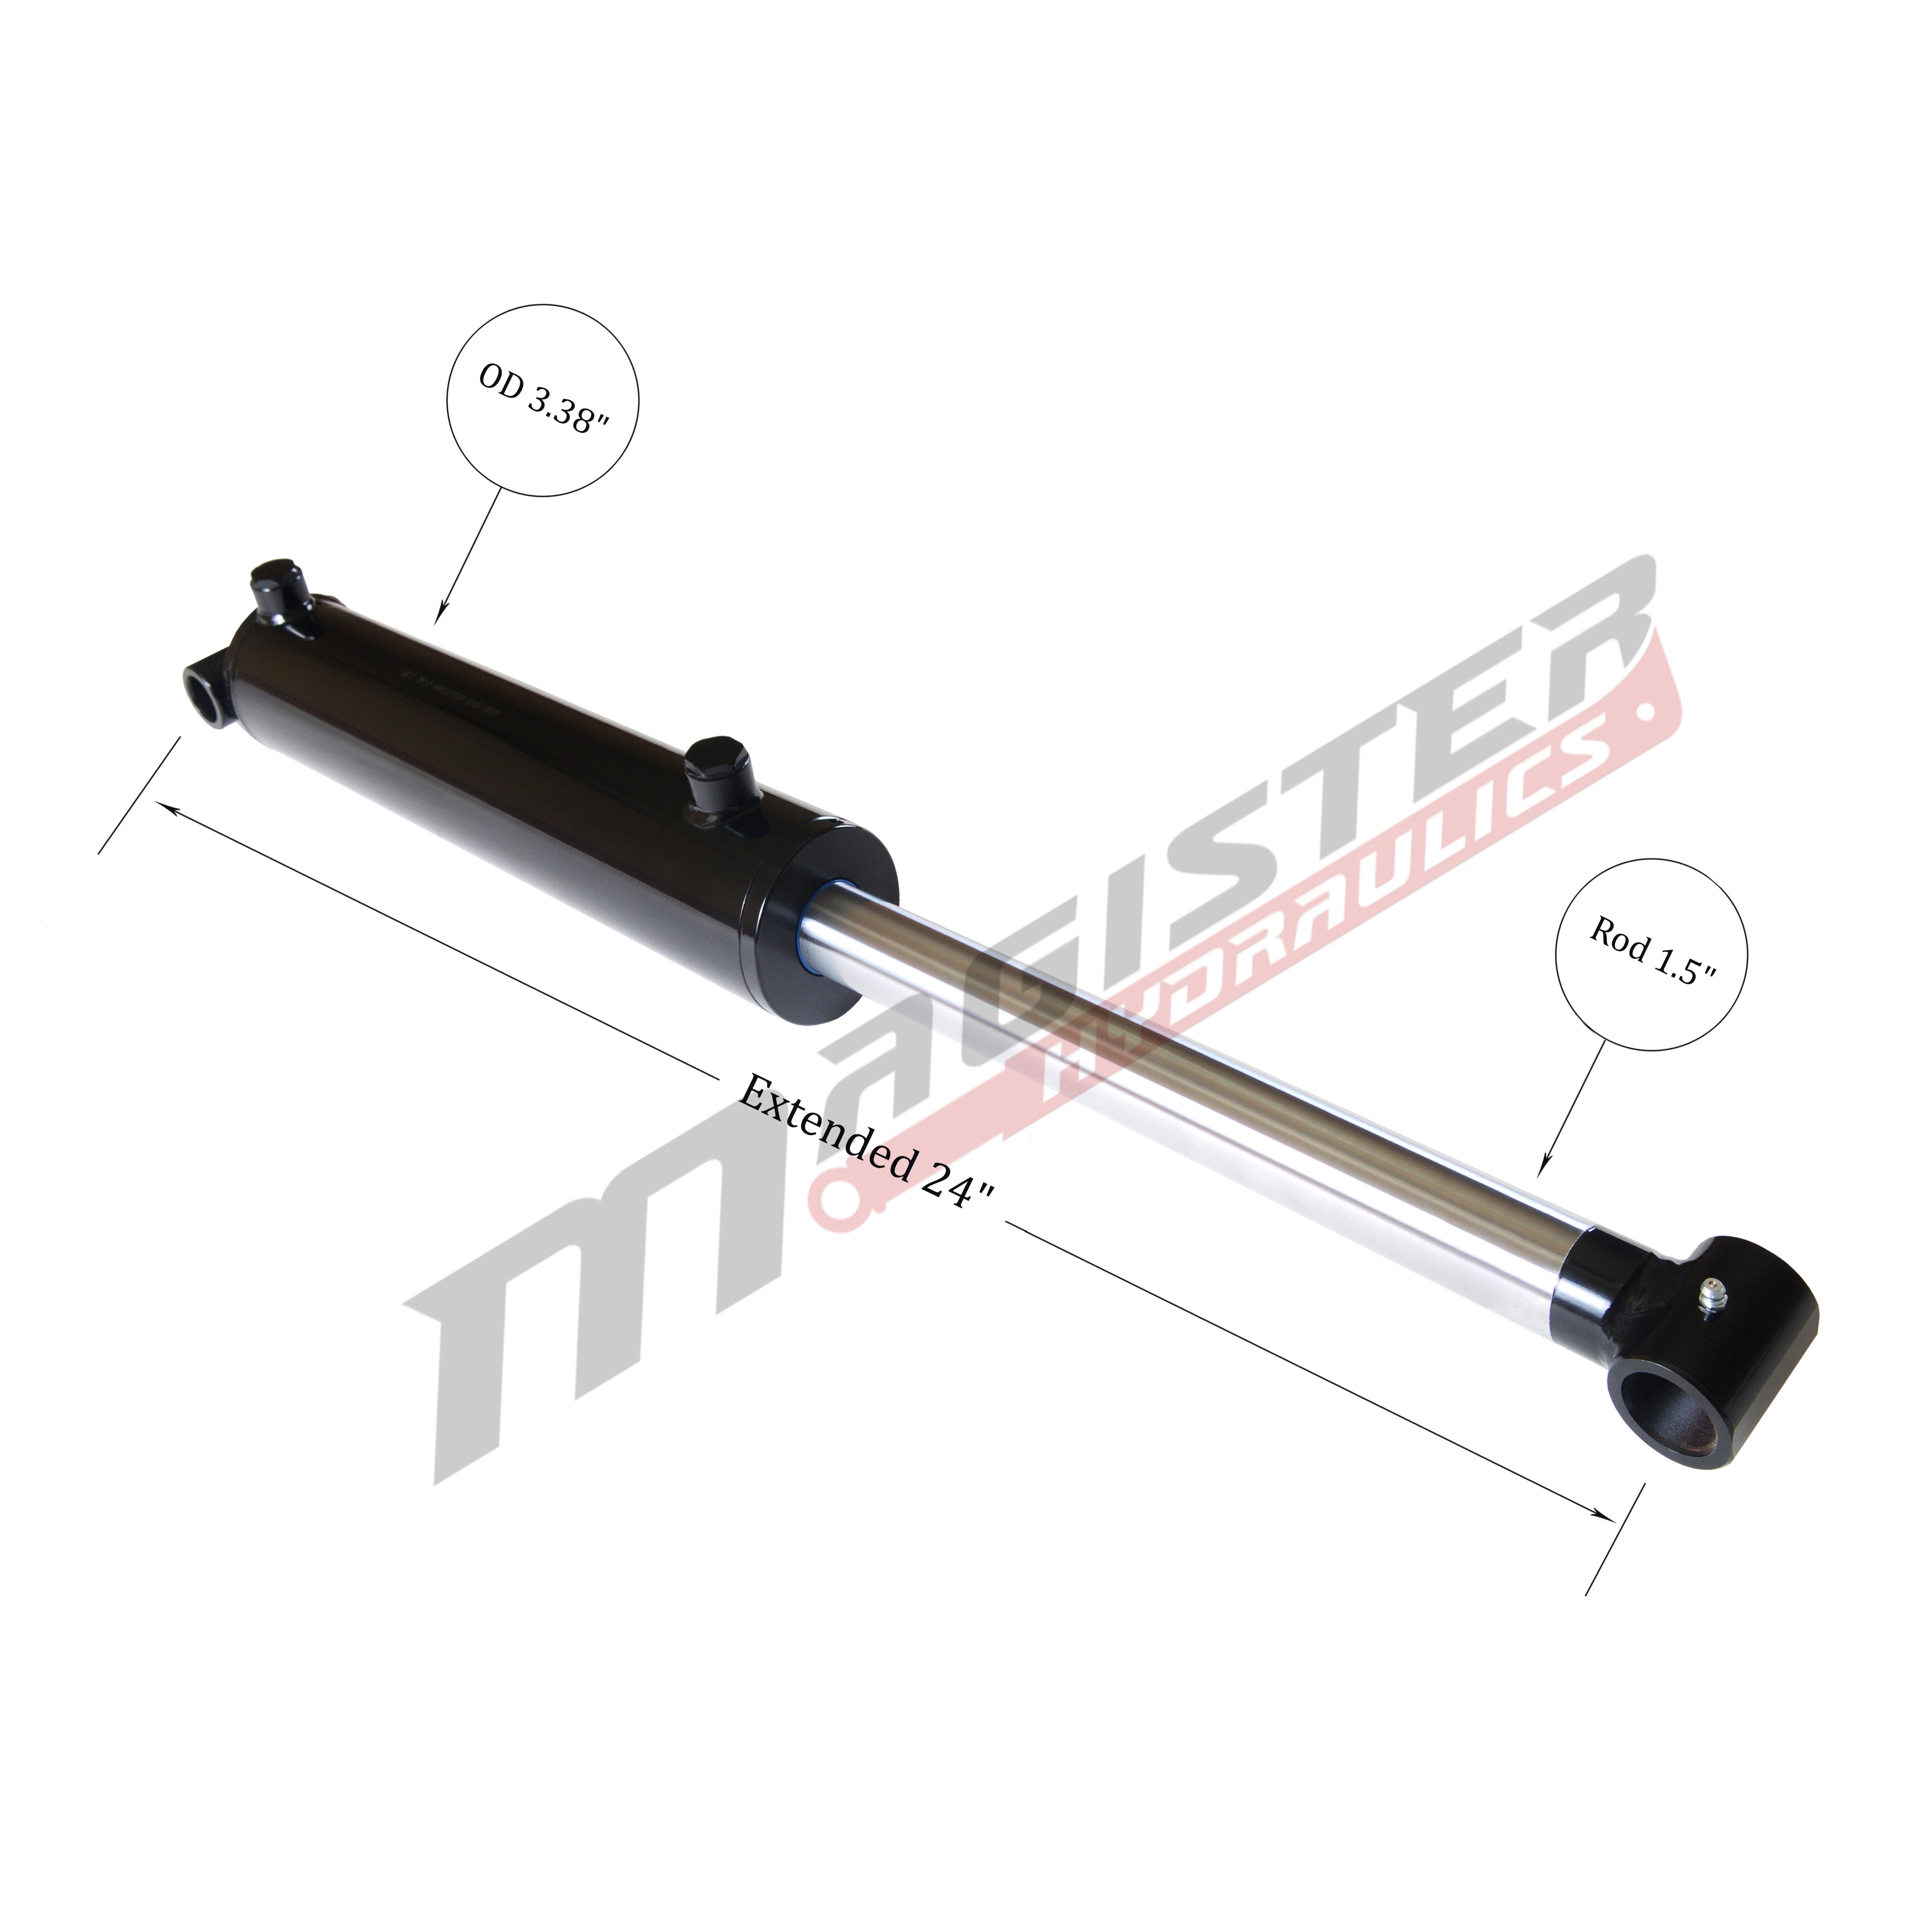 3 bore x 8 stroke hydraulic cylinder, welded cross tube double acting cylinder | Magister Hydraulics